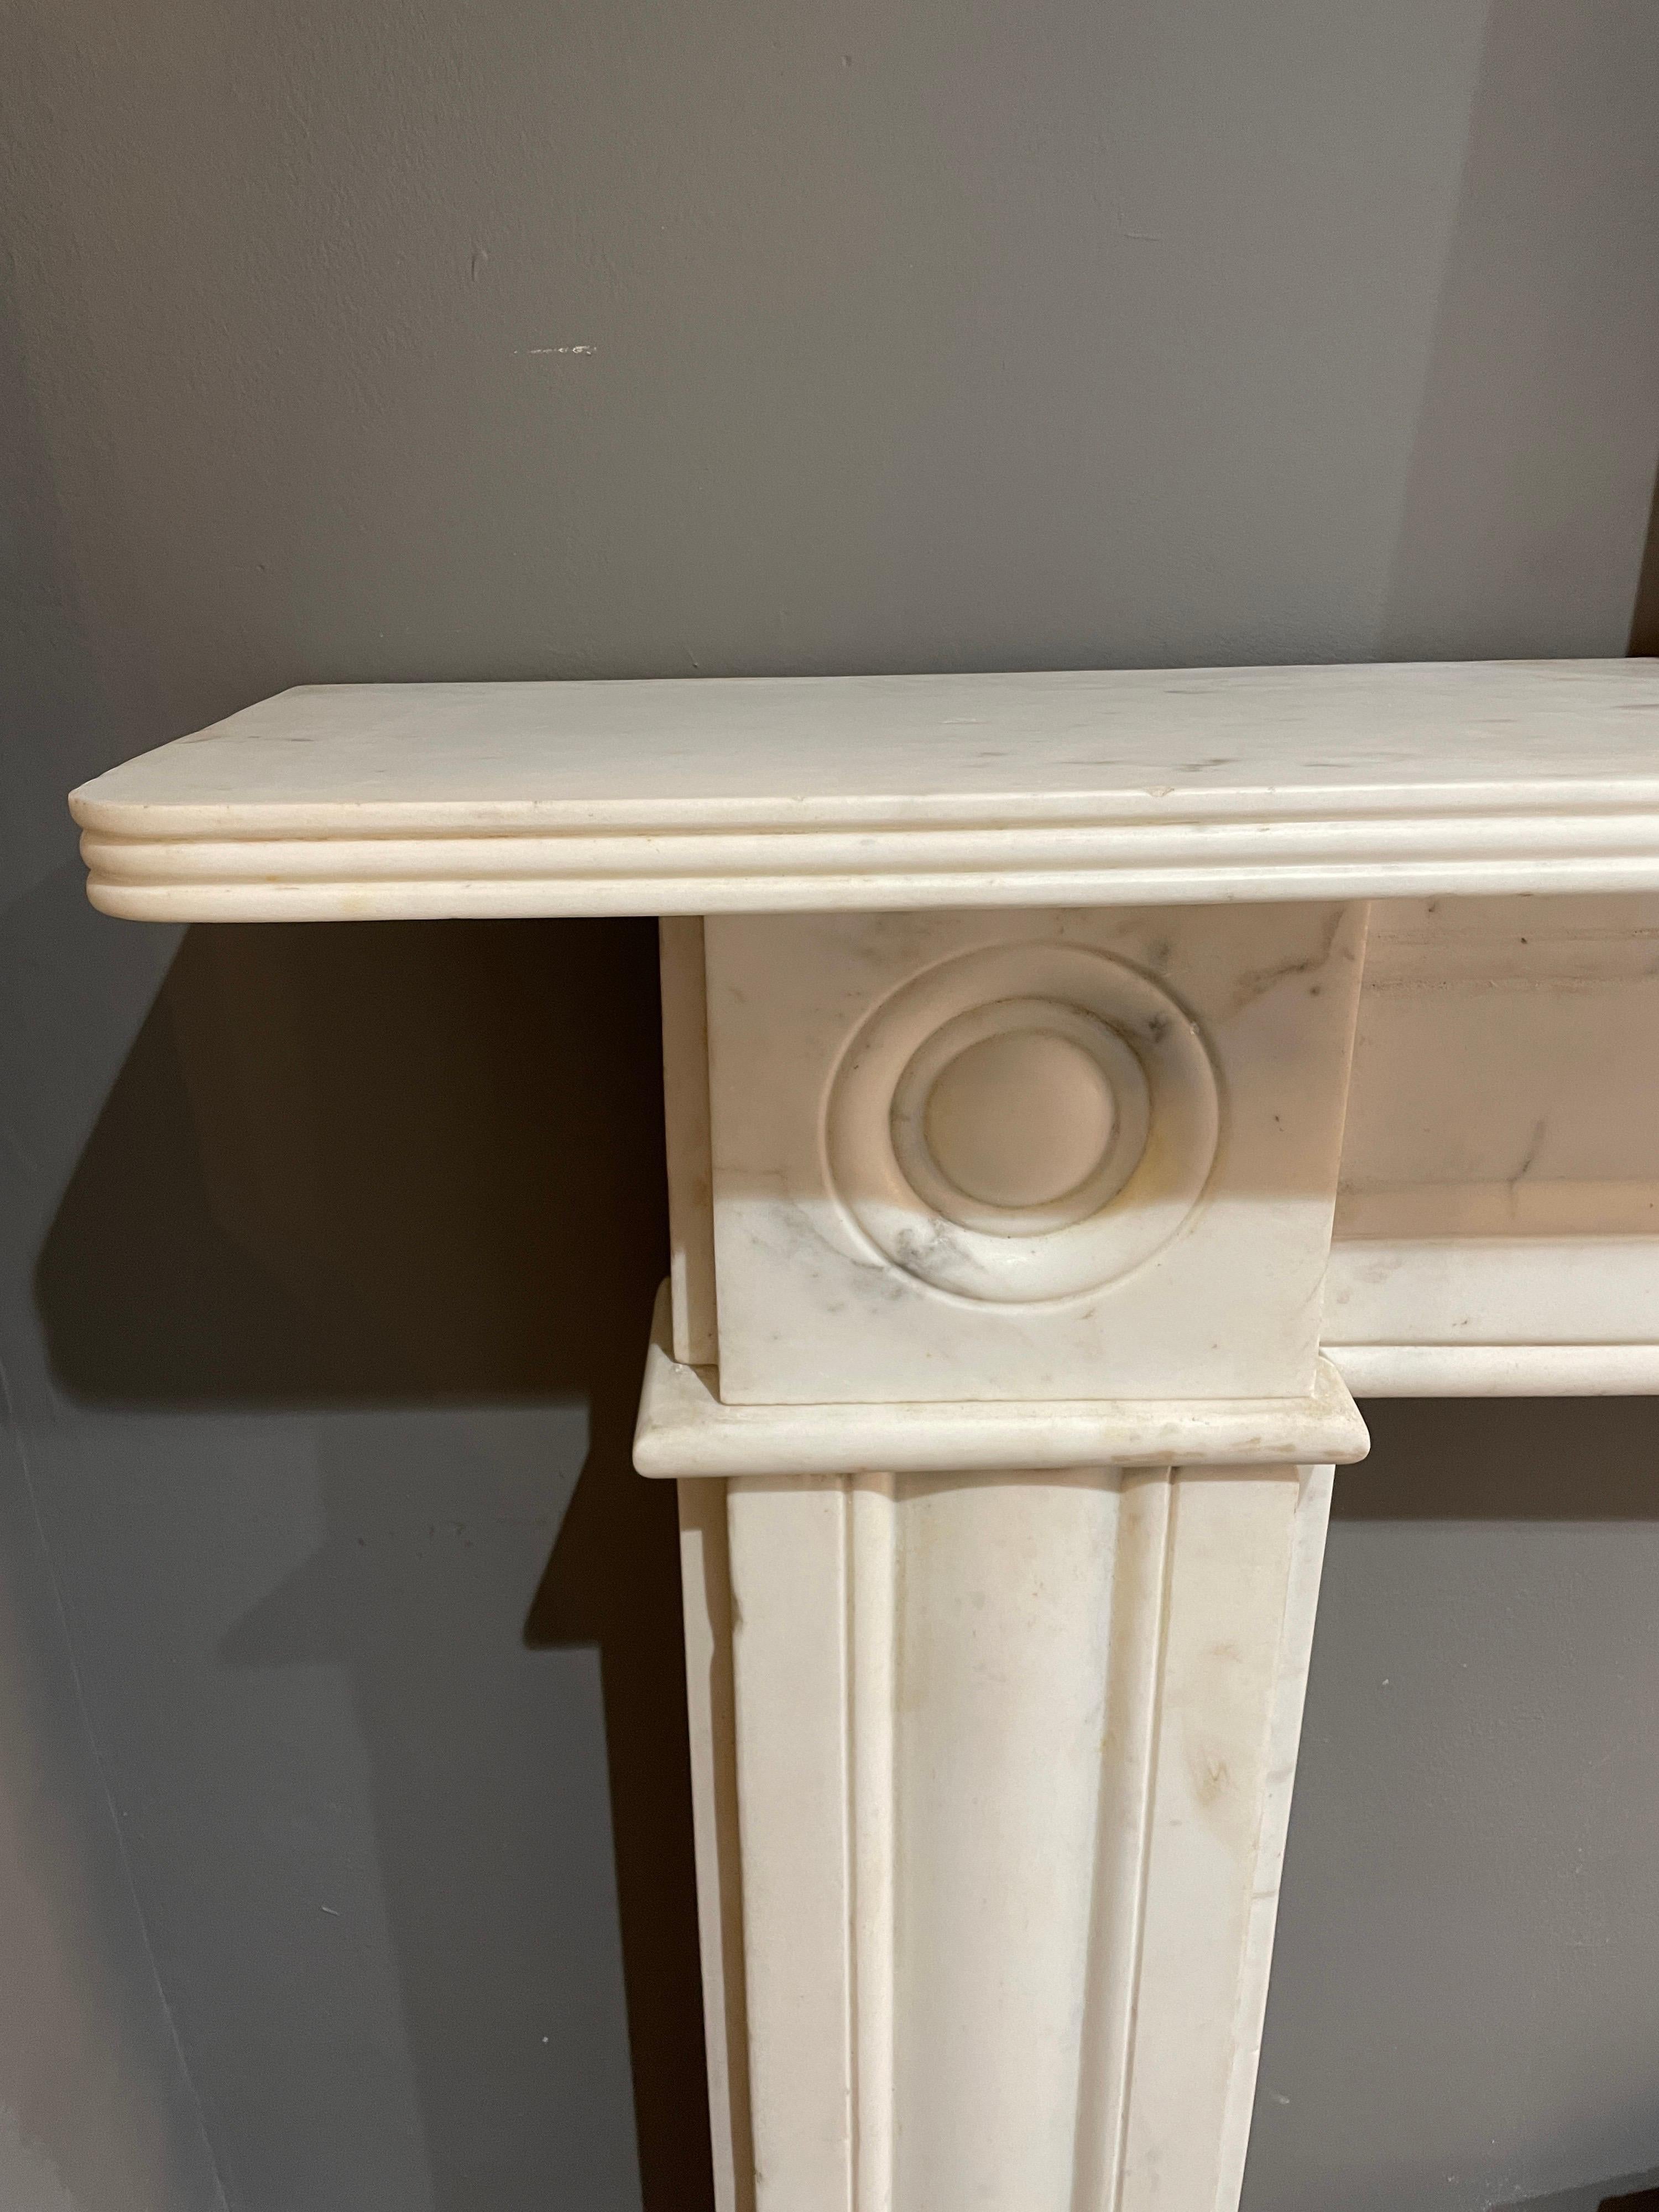 An early 19th century Regency fireplace from Dublin Ireland, executed in Italian Statuary white marble. The jambs and frieze with conforming wide mouldings, larger than usual carved roundel corner blocks and stood on separate foot blocks. All